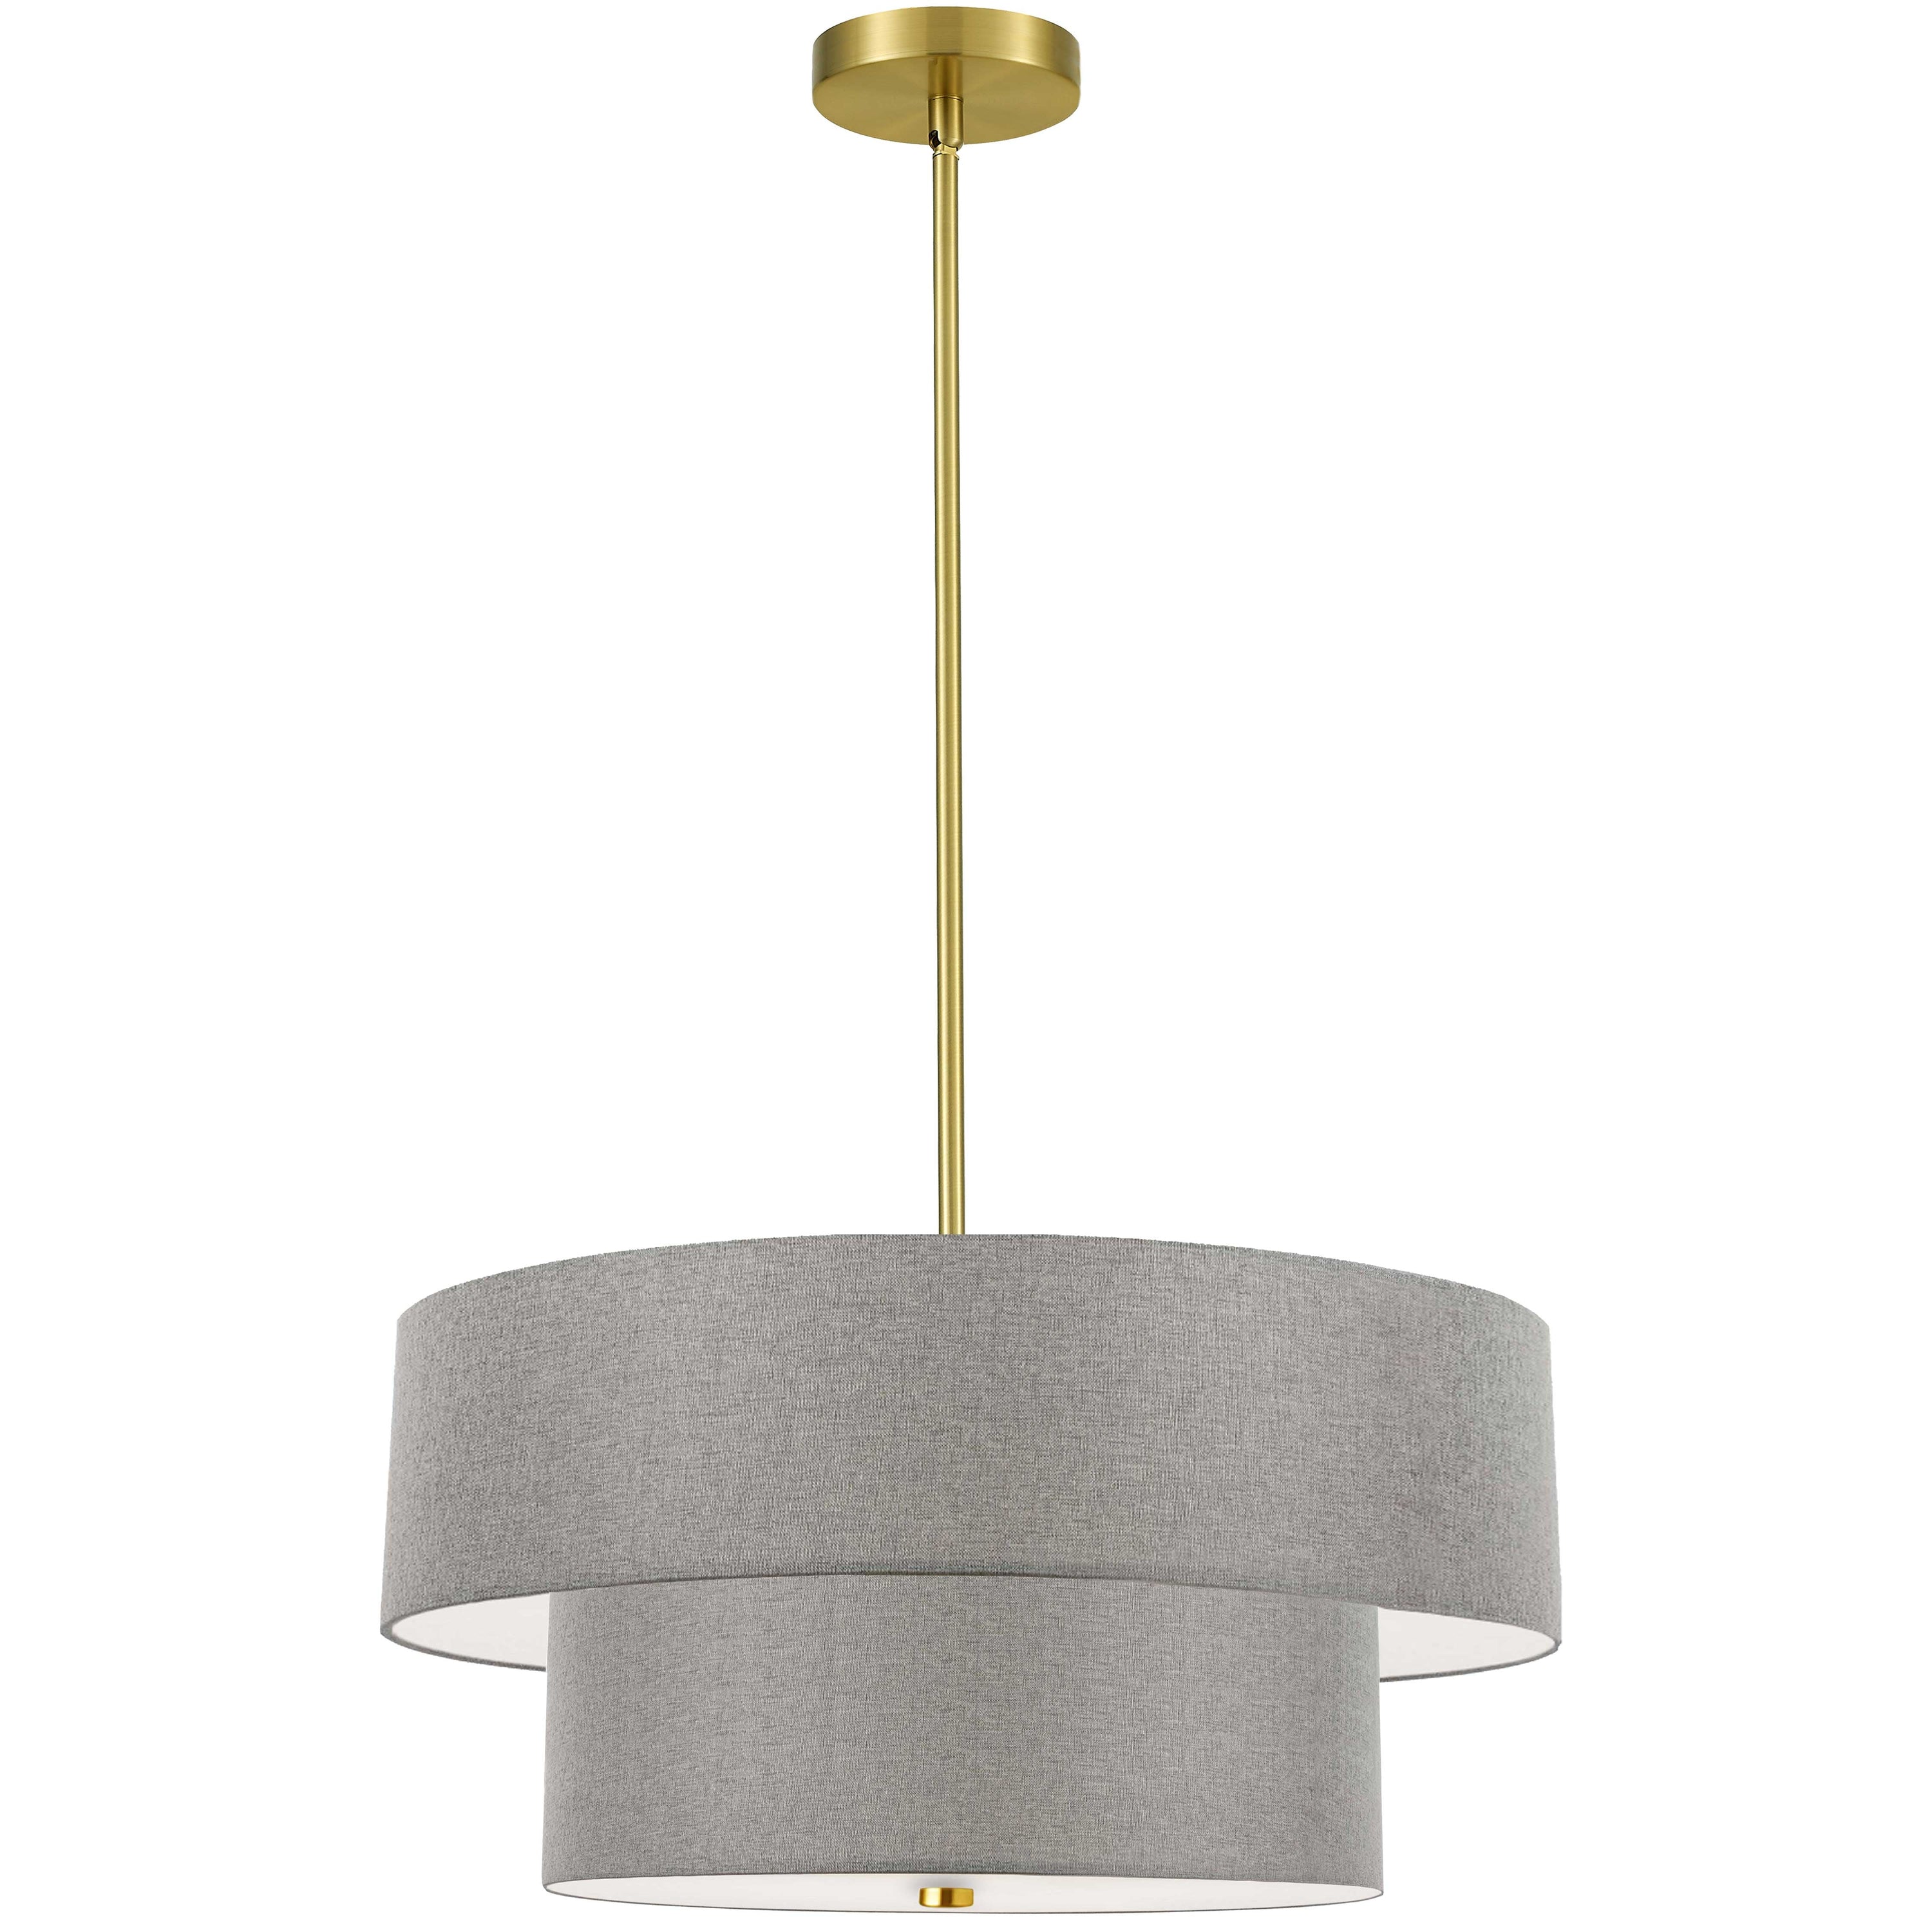 Dainolite Everly - 571-224P-AGB-GRY - 4 Light 2 Tier Pendant, Aged Brass with Grey Shade - Aged Brass